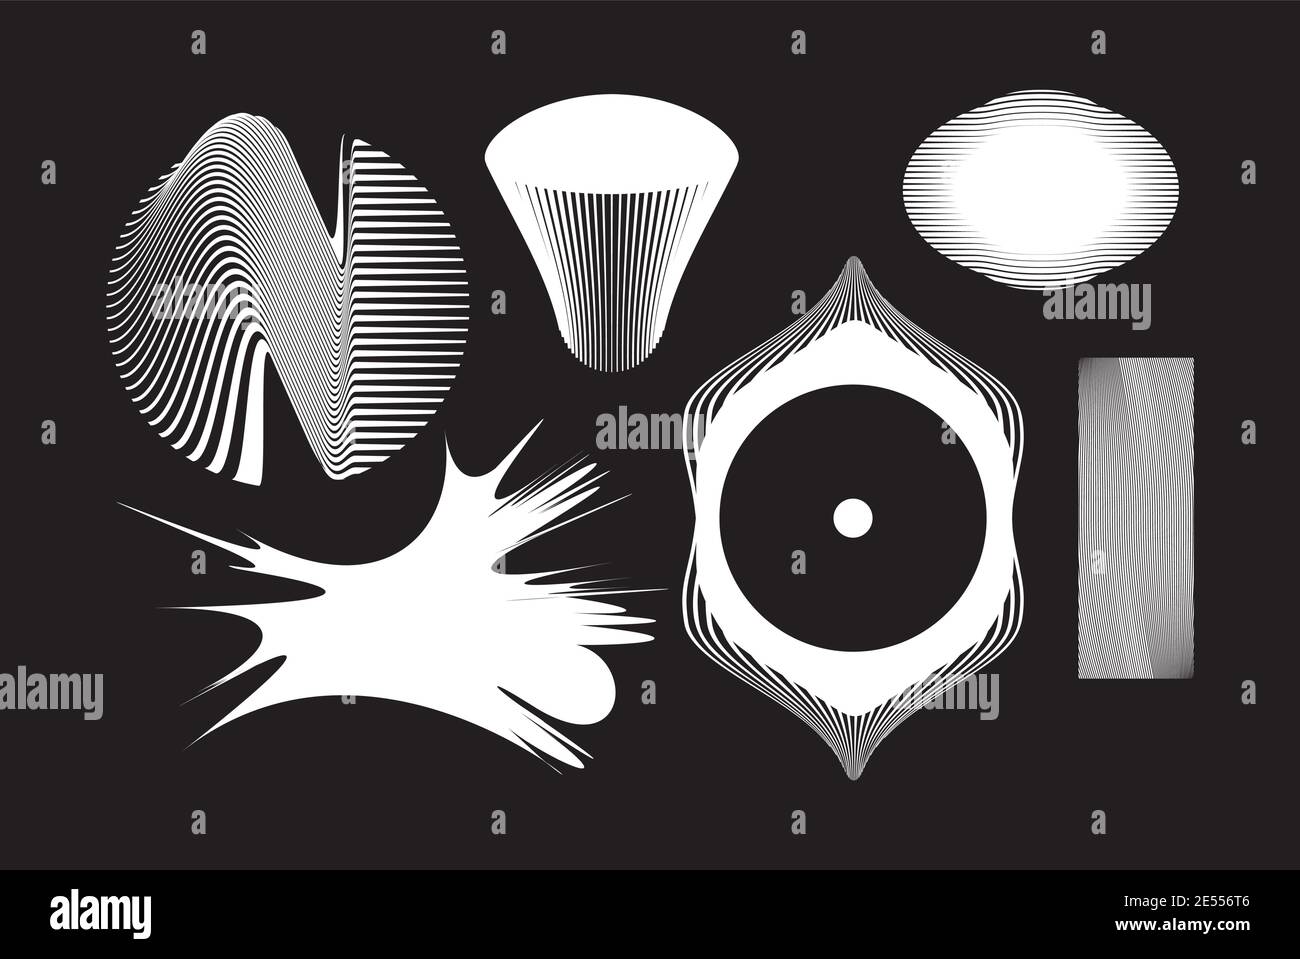 The reimagined design of 80-90s, retro-futurism, brutalist style. New look at design, with distorted and extraordinary forms, bold abstract geometric Stock Vector